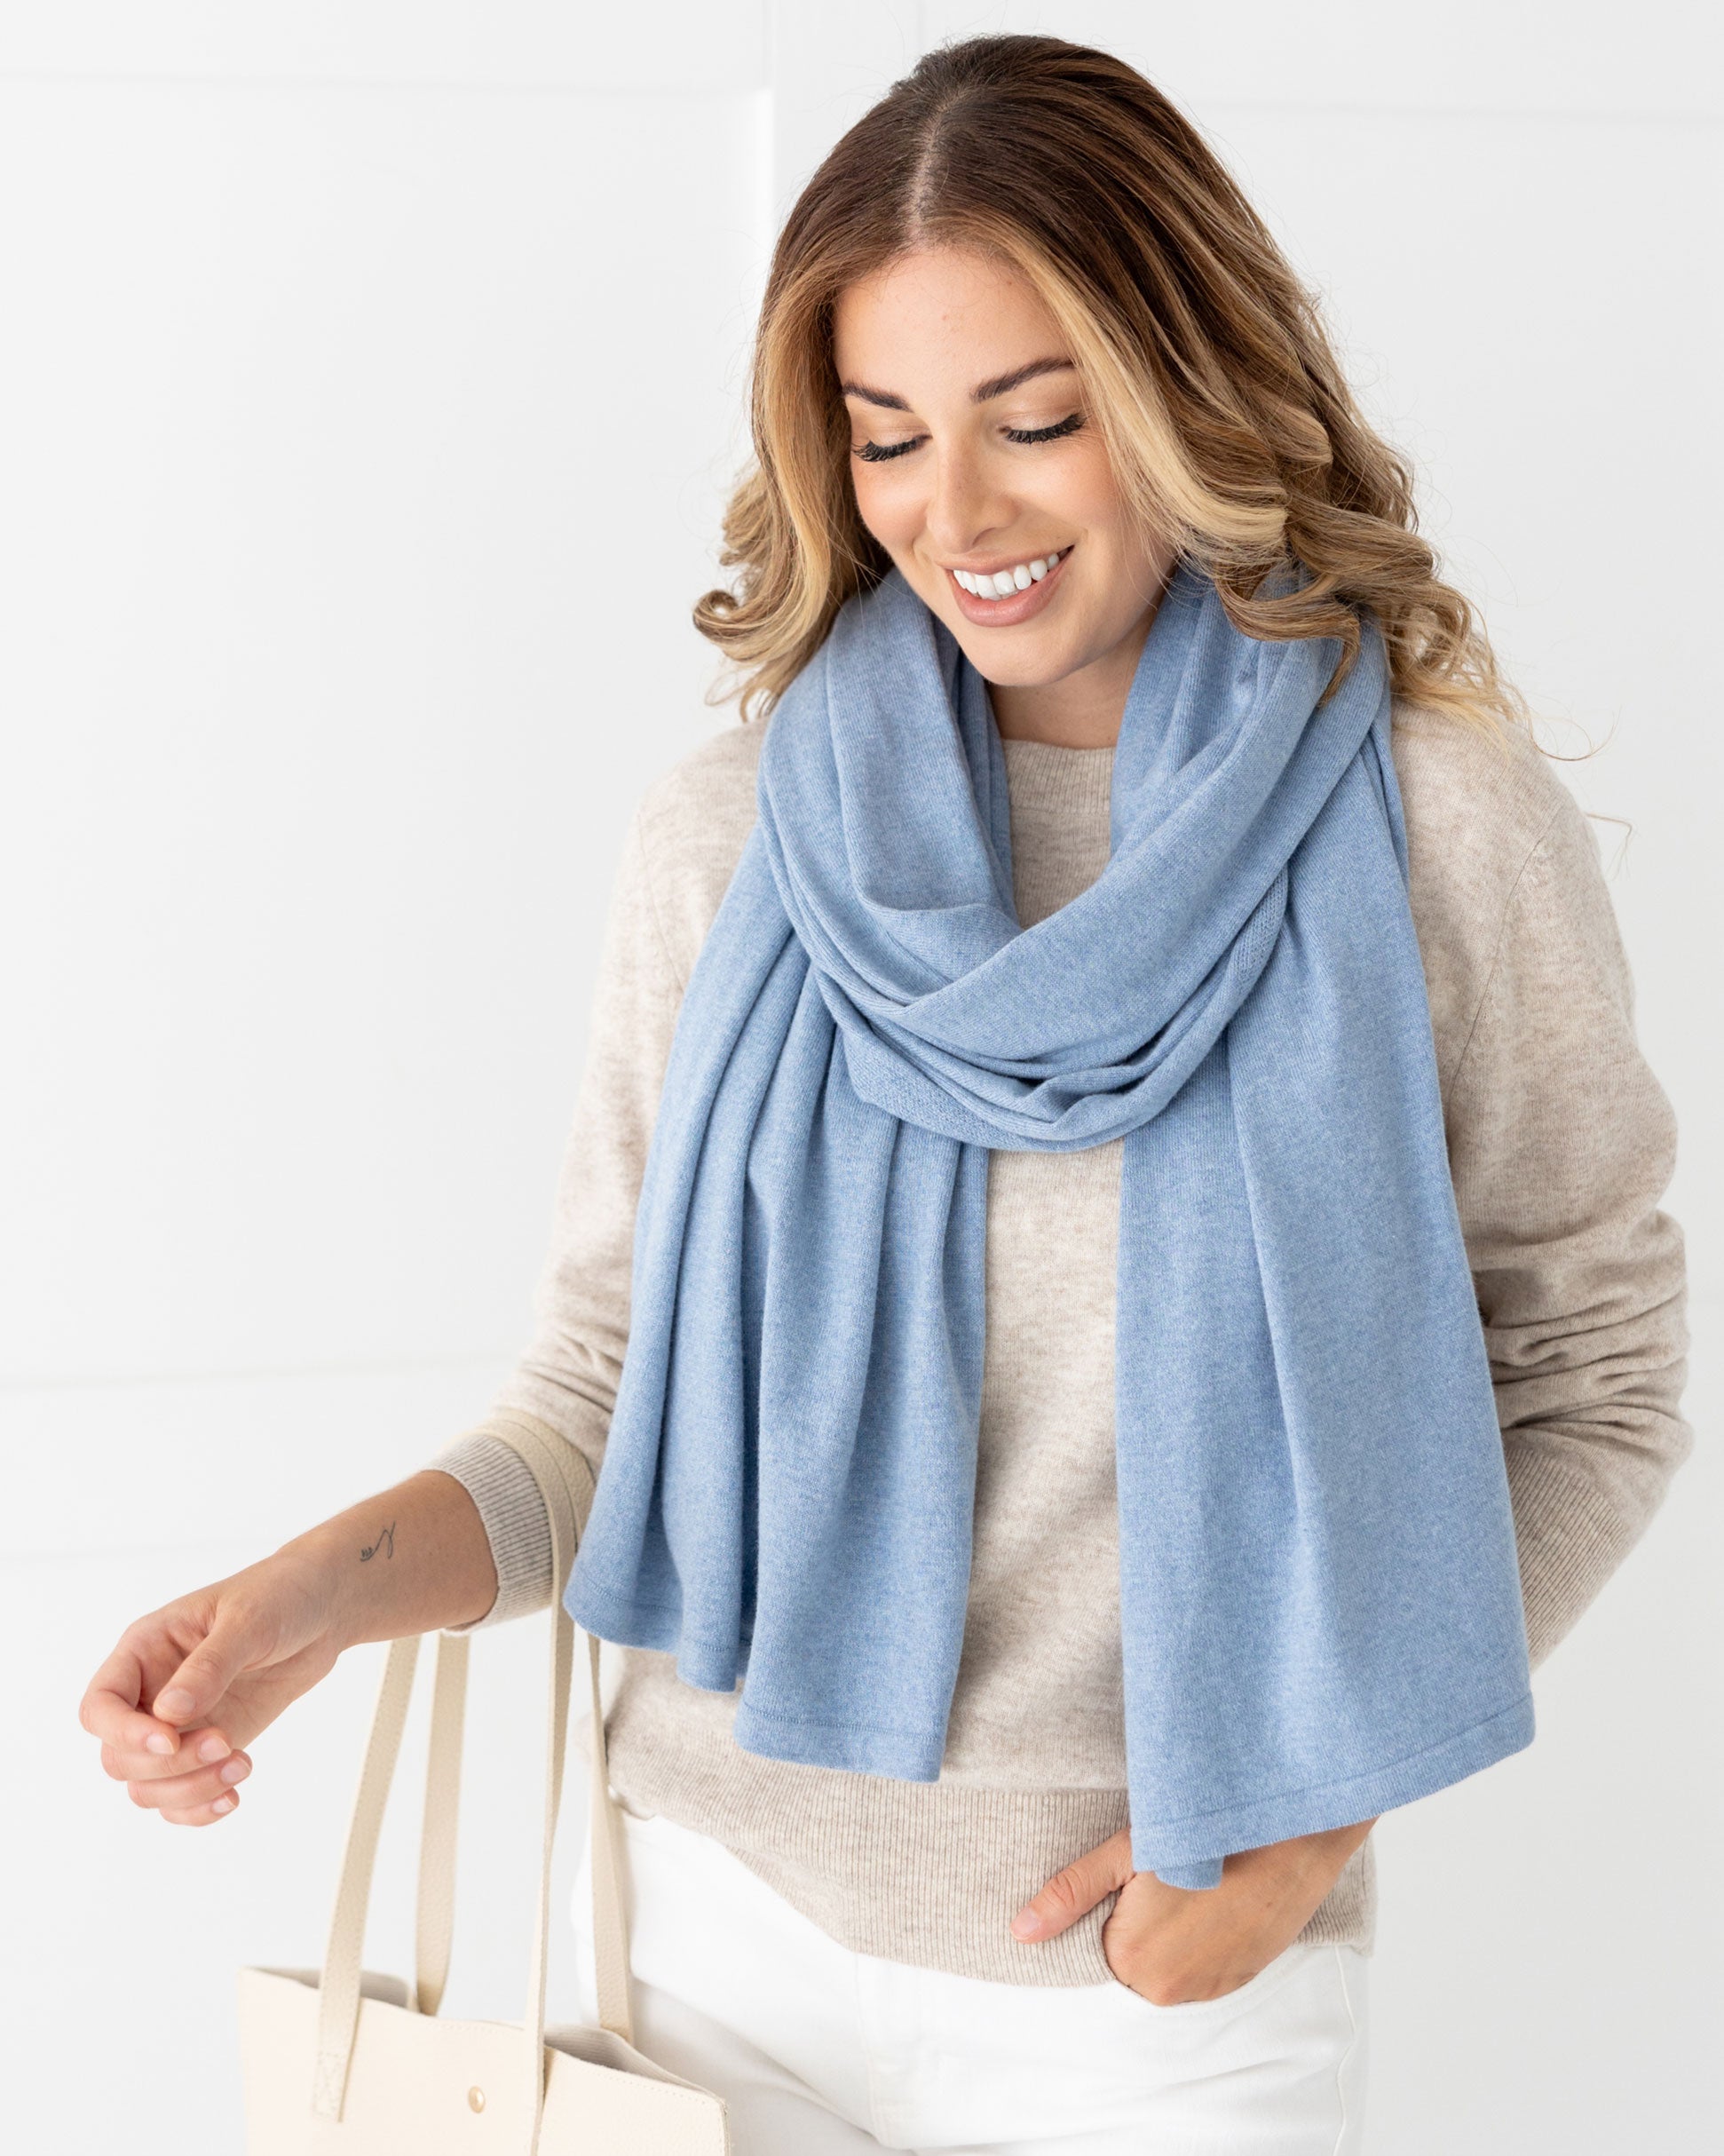 Woman wearing the Cashmere Cotton Luxe Travel Scarf in Horizon Blue which is a light blue scarf, pulling a suitcase while holding her coffee cup